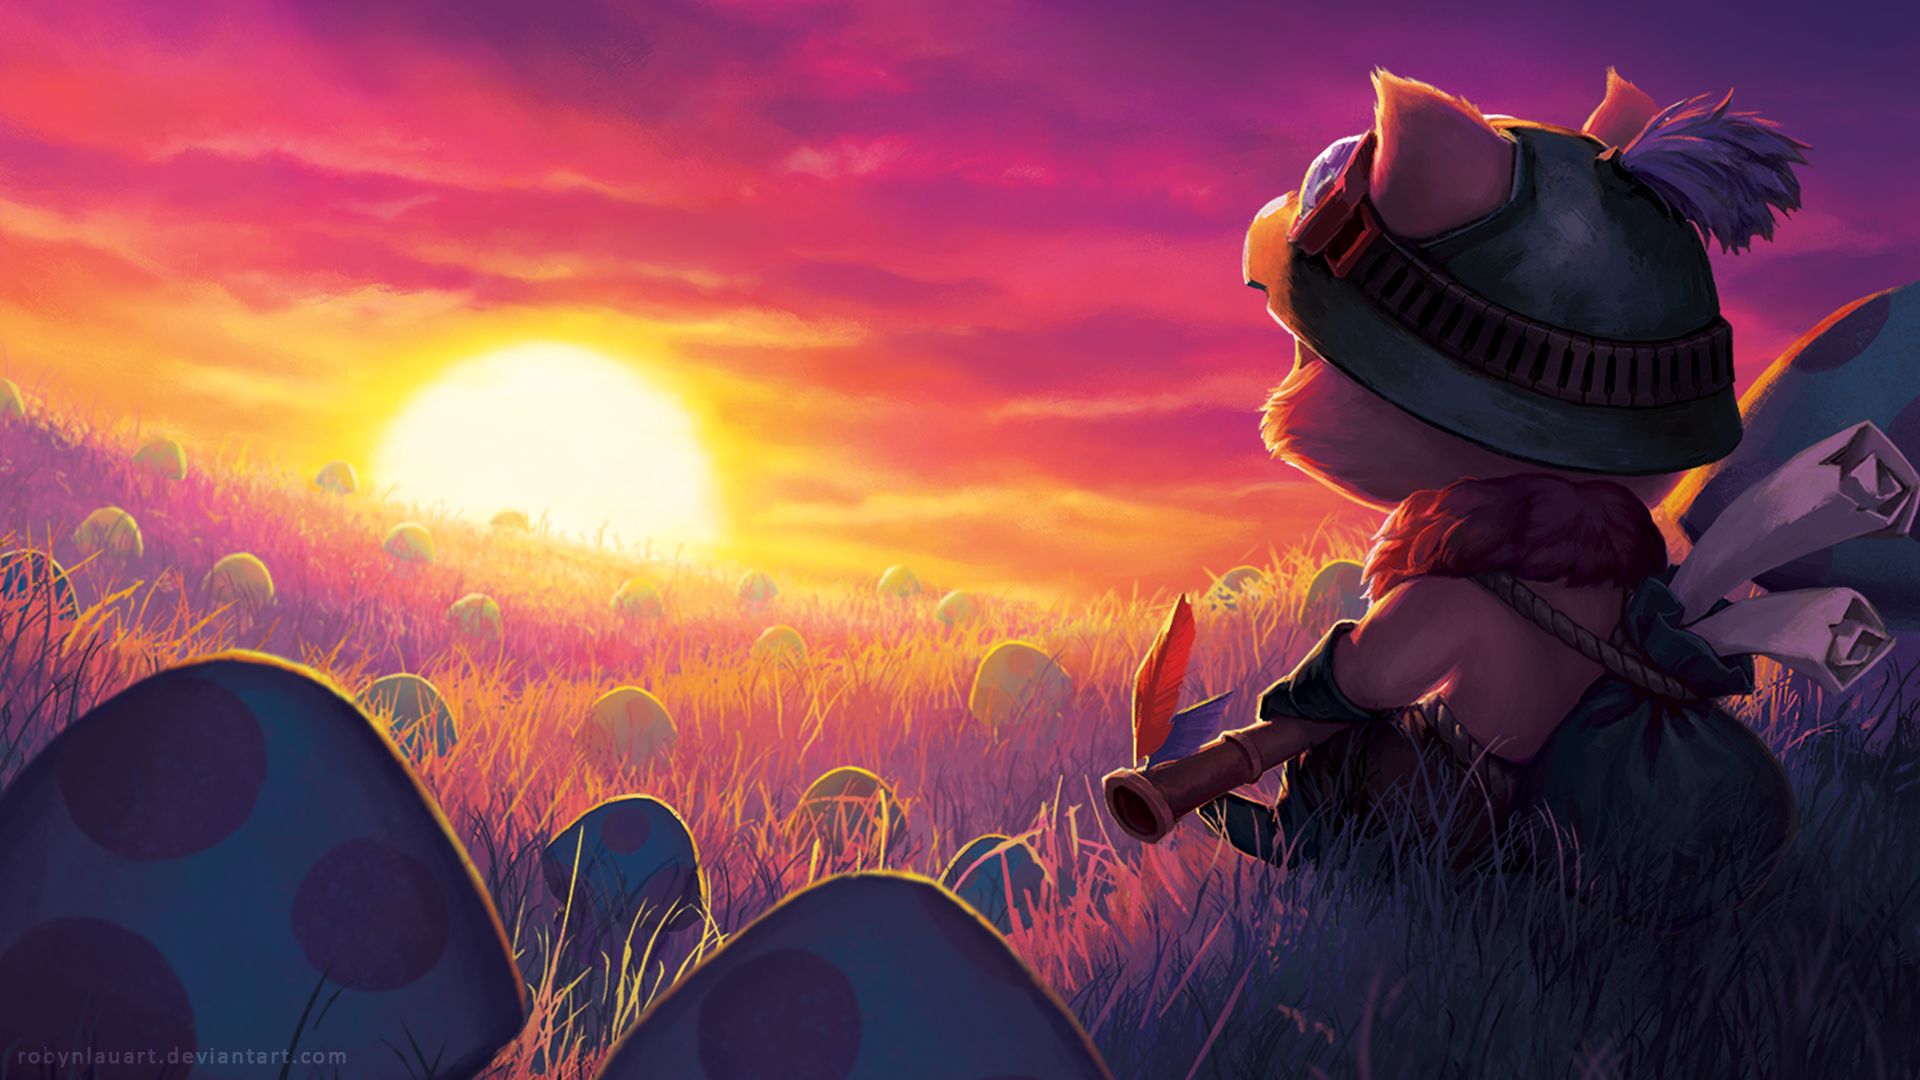 mushroom, league of legends, sunset, video game, field, teemo (league of legends) High Definition image